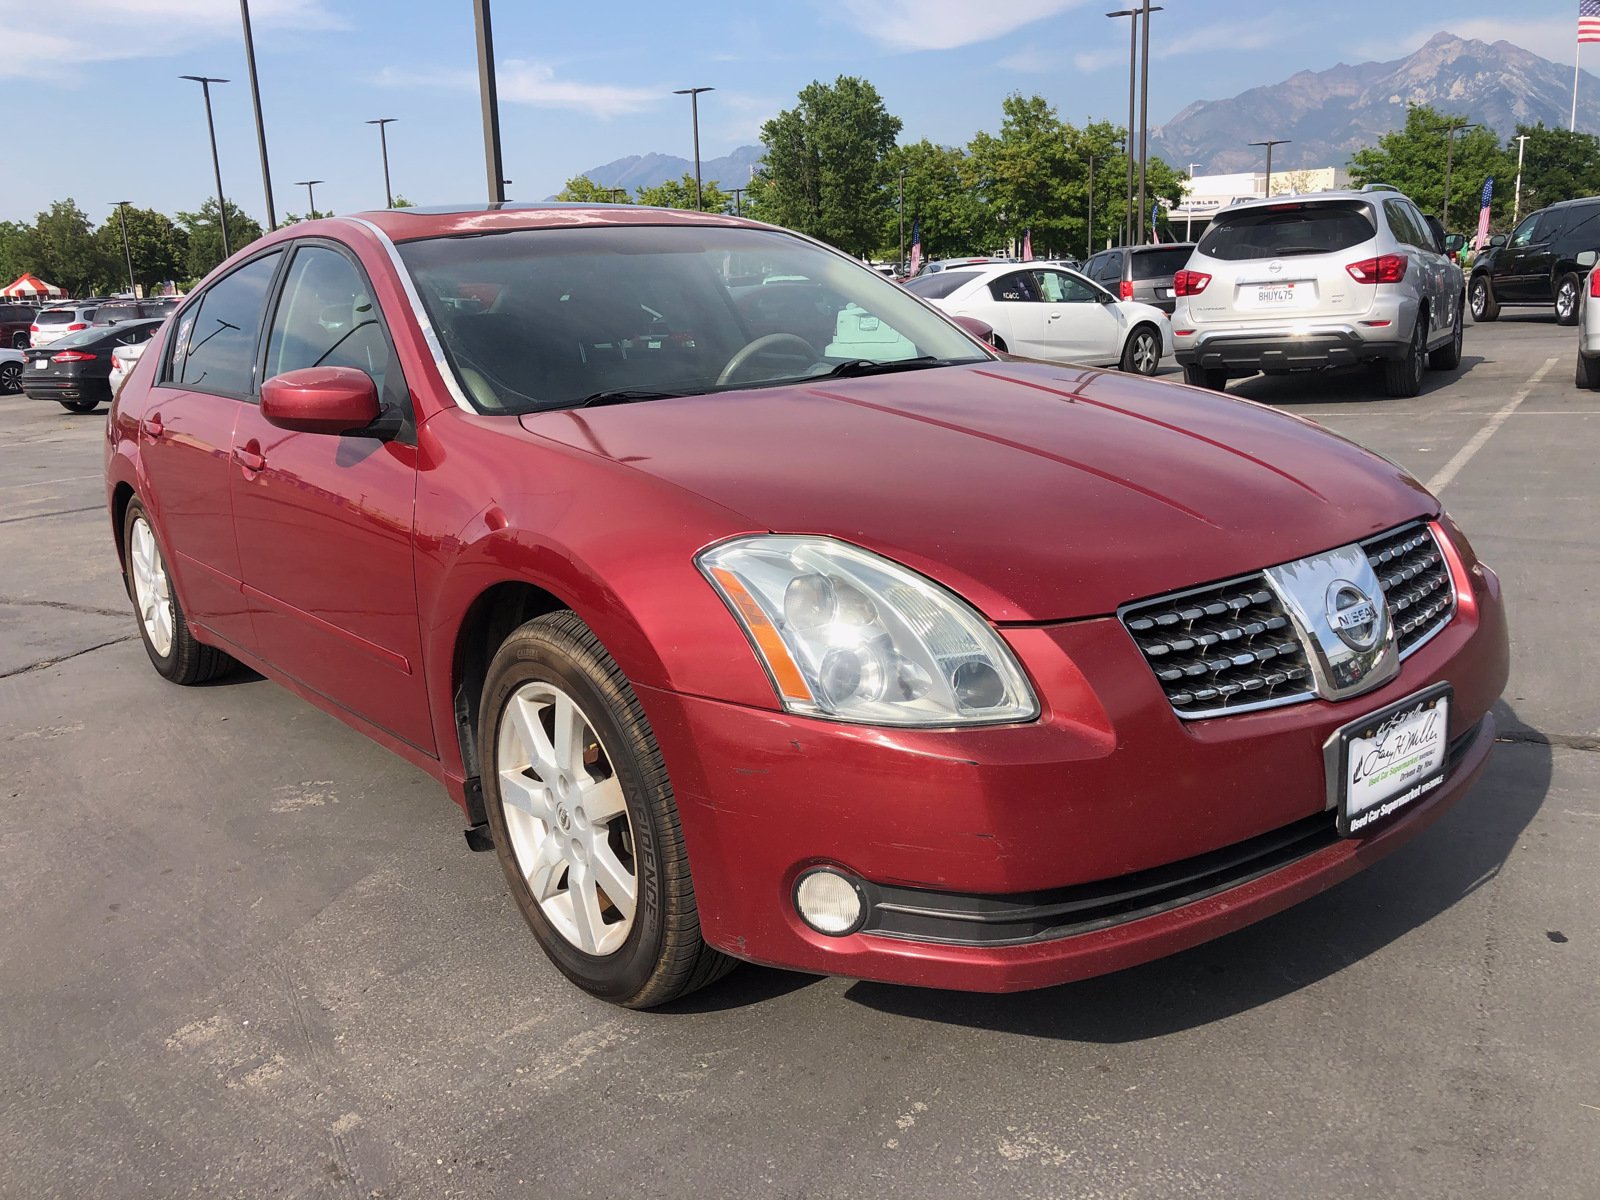 PreOwned 2005 Nissan Maxima 3.5 SE 4dr Car in Riverdale 